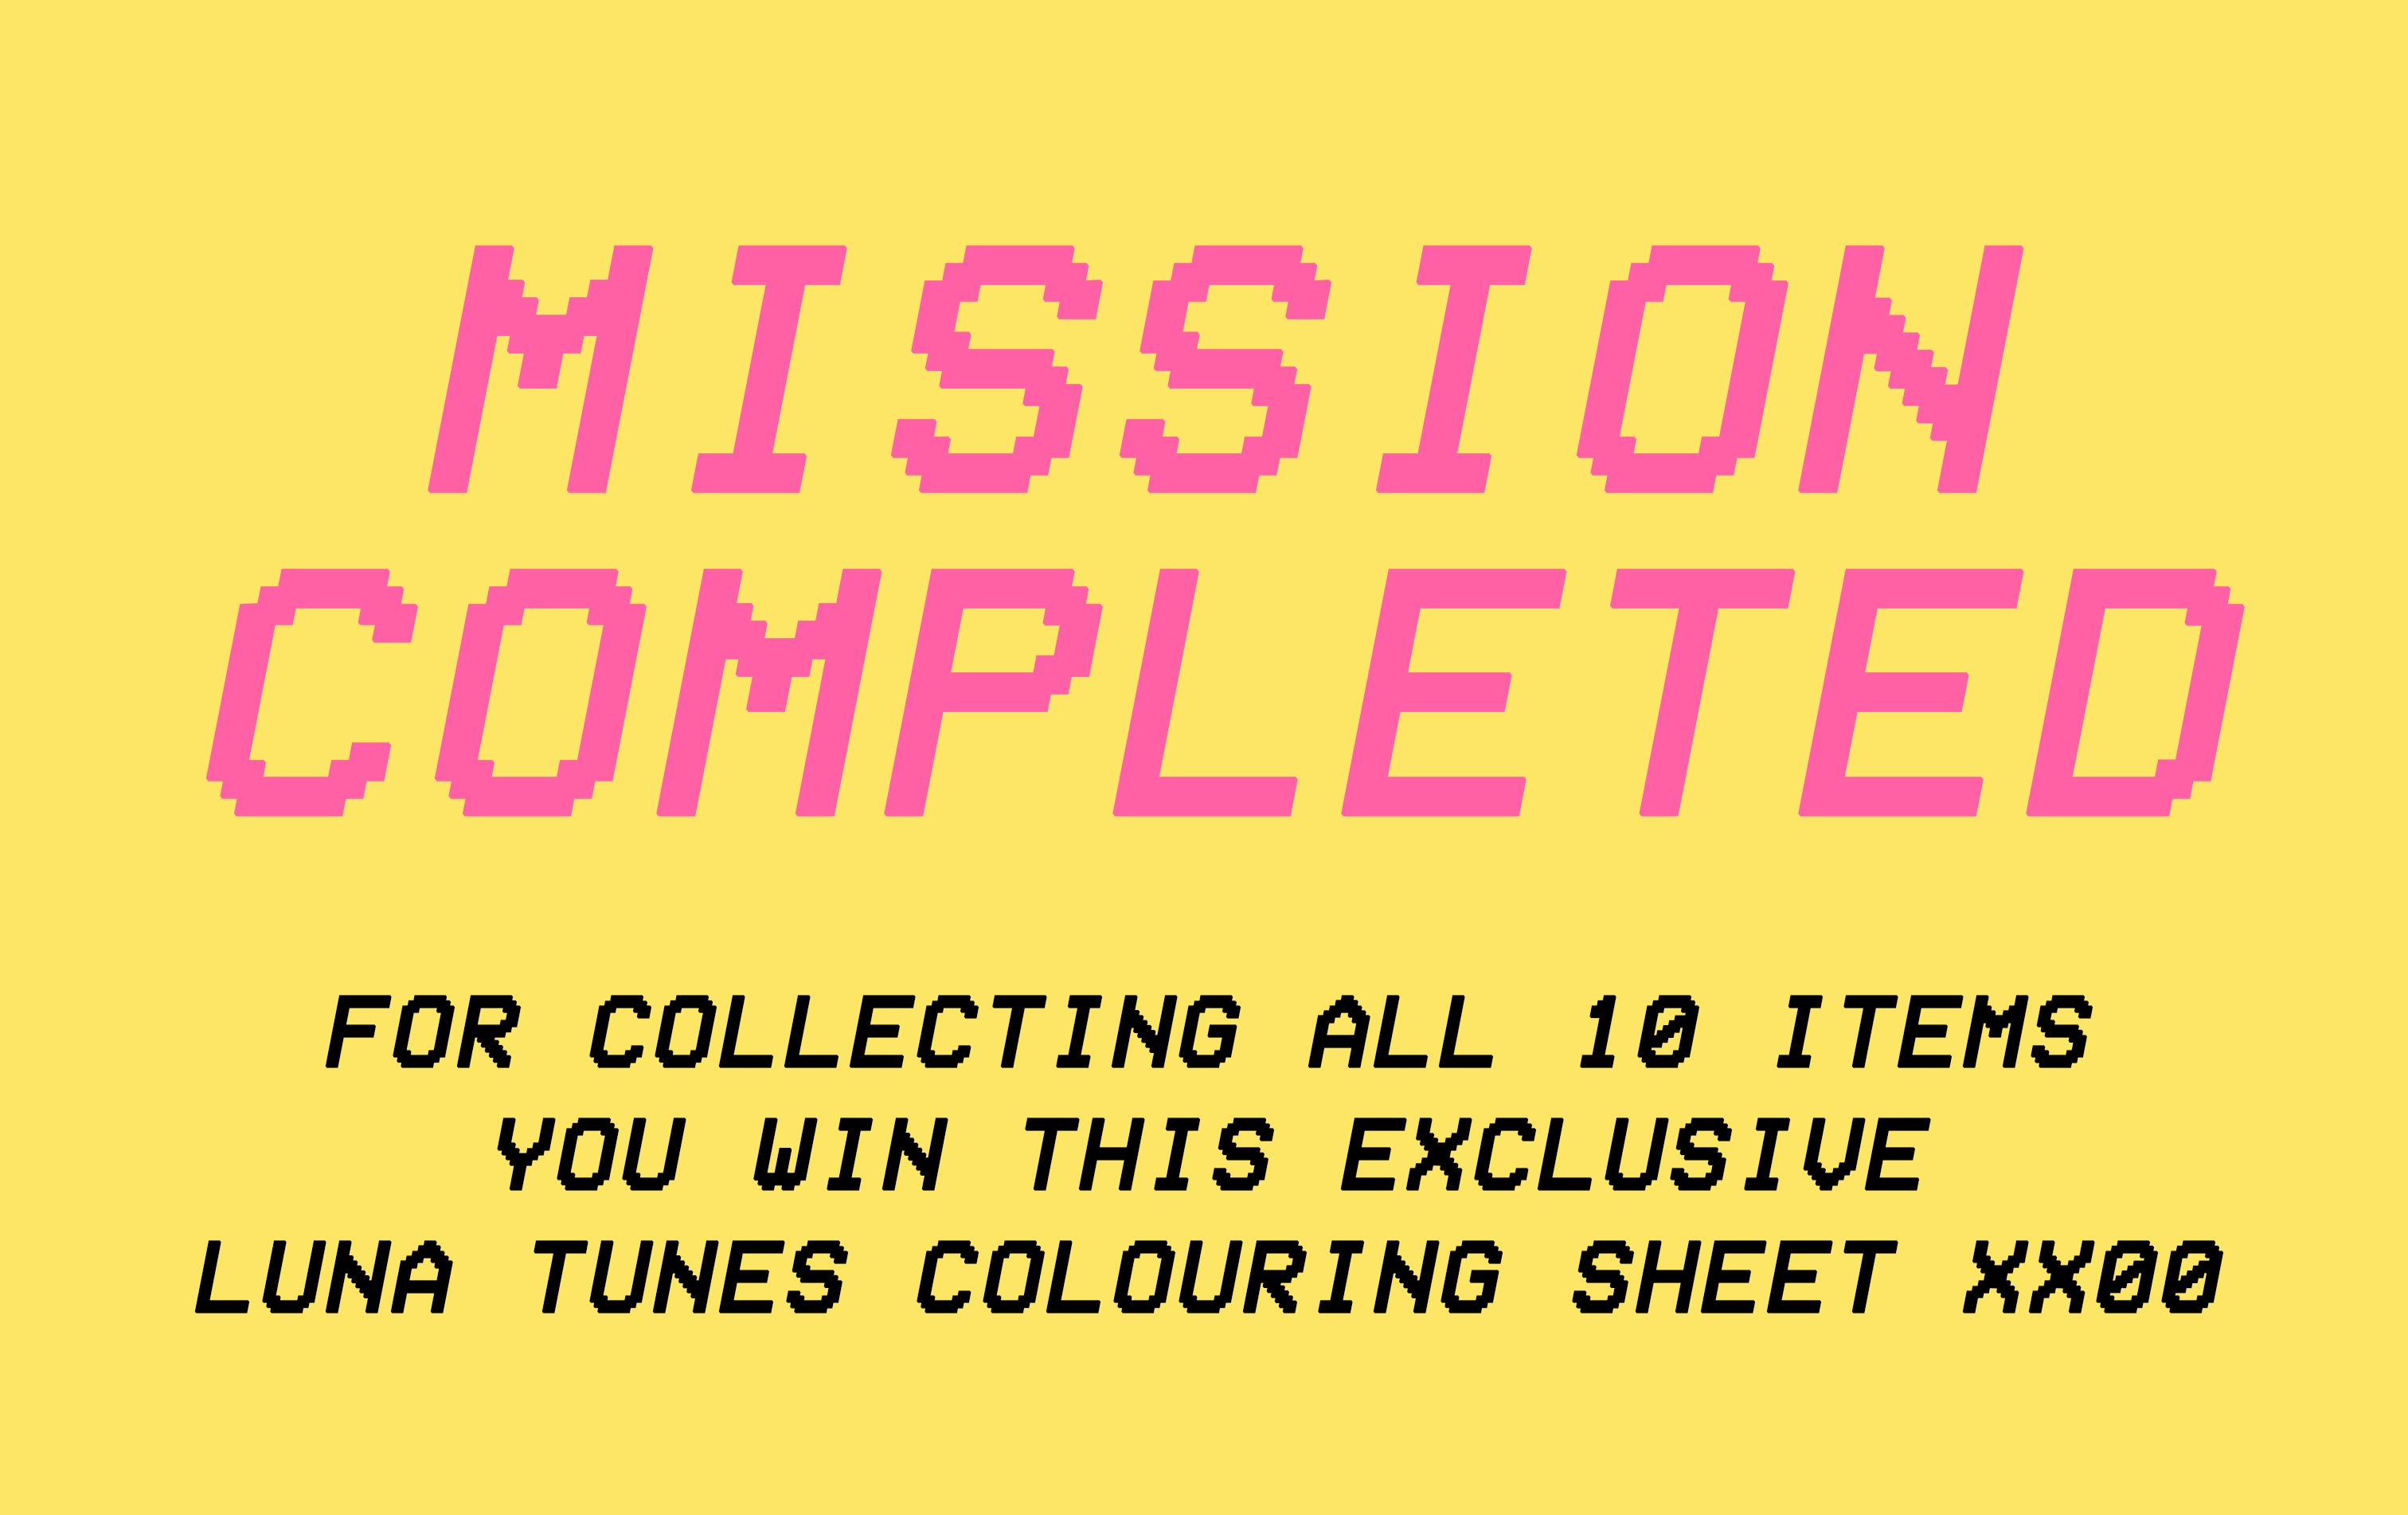 mission completed. For collecting all 10 items you win this exclusive Luna Tunes colouring sheet.